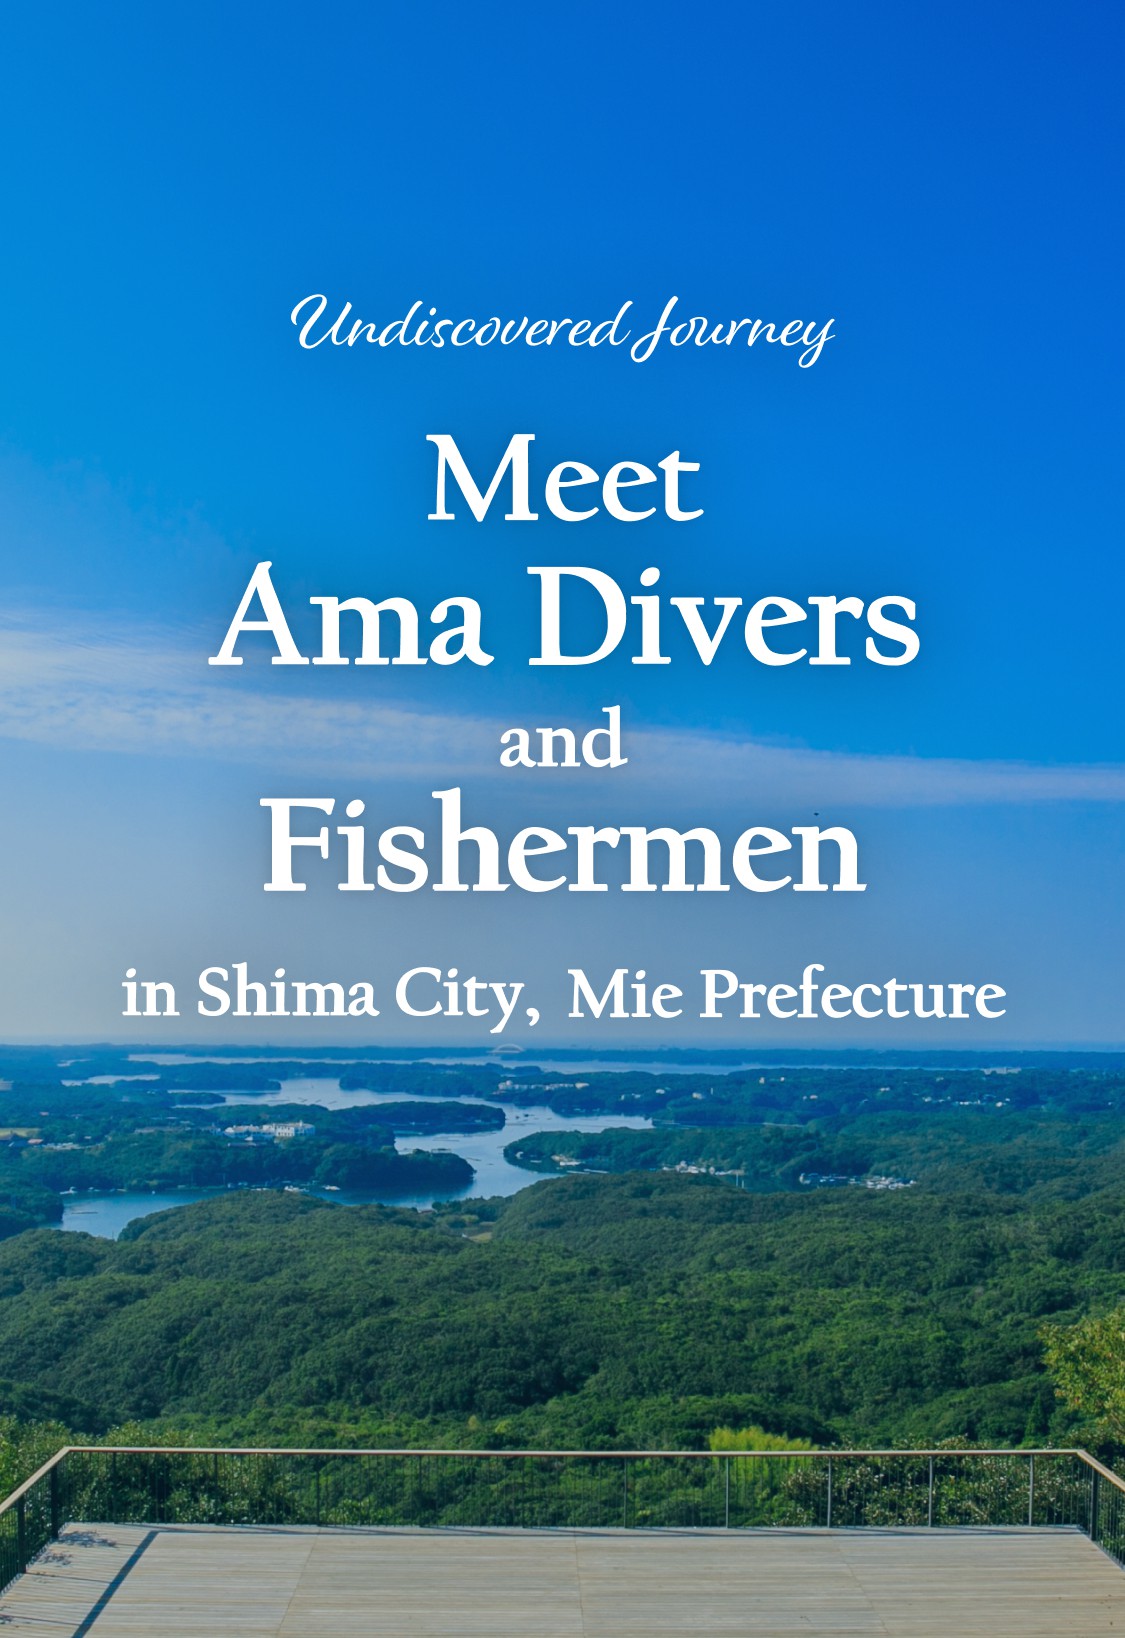 Meet Ama Divers and Fishermen in Shima City, Mie Prefecture